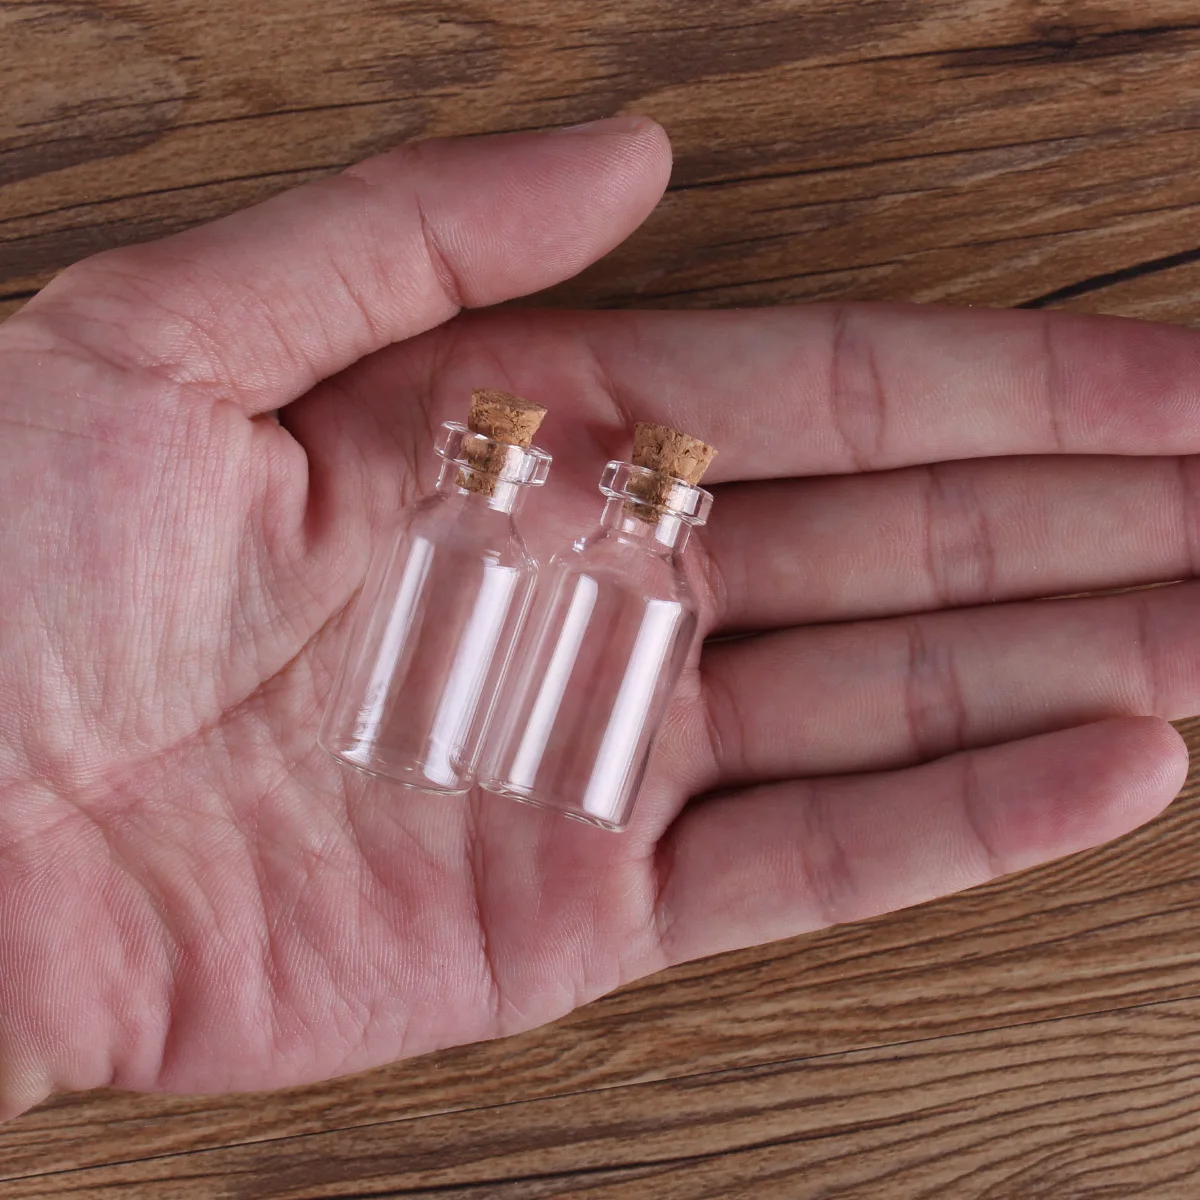 

100pieces 5ml 18x40x7mm Transparent Small Glass Bottles Jars Vials Terrarium with Cork Stopper for Wedding Gift Crafts